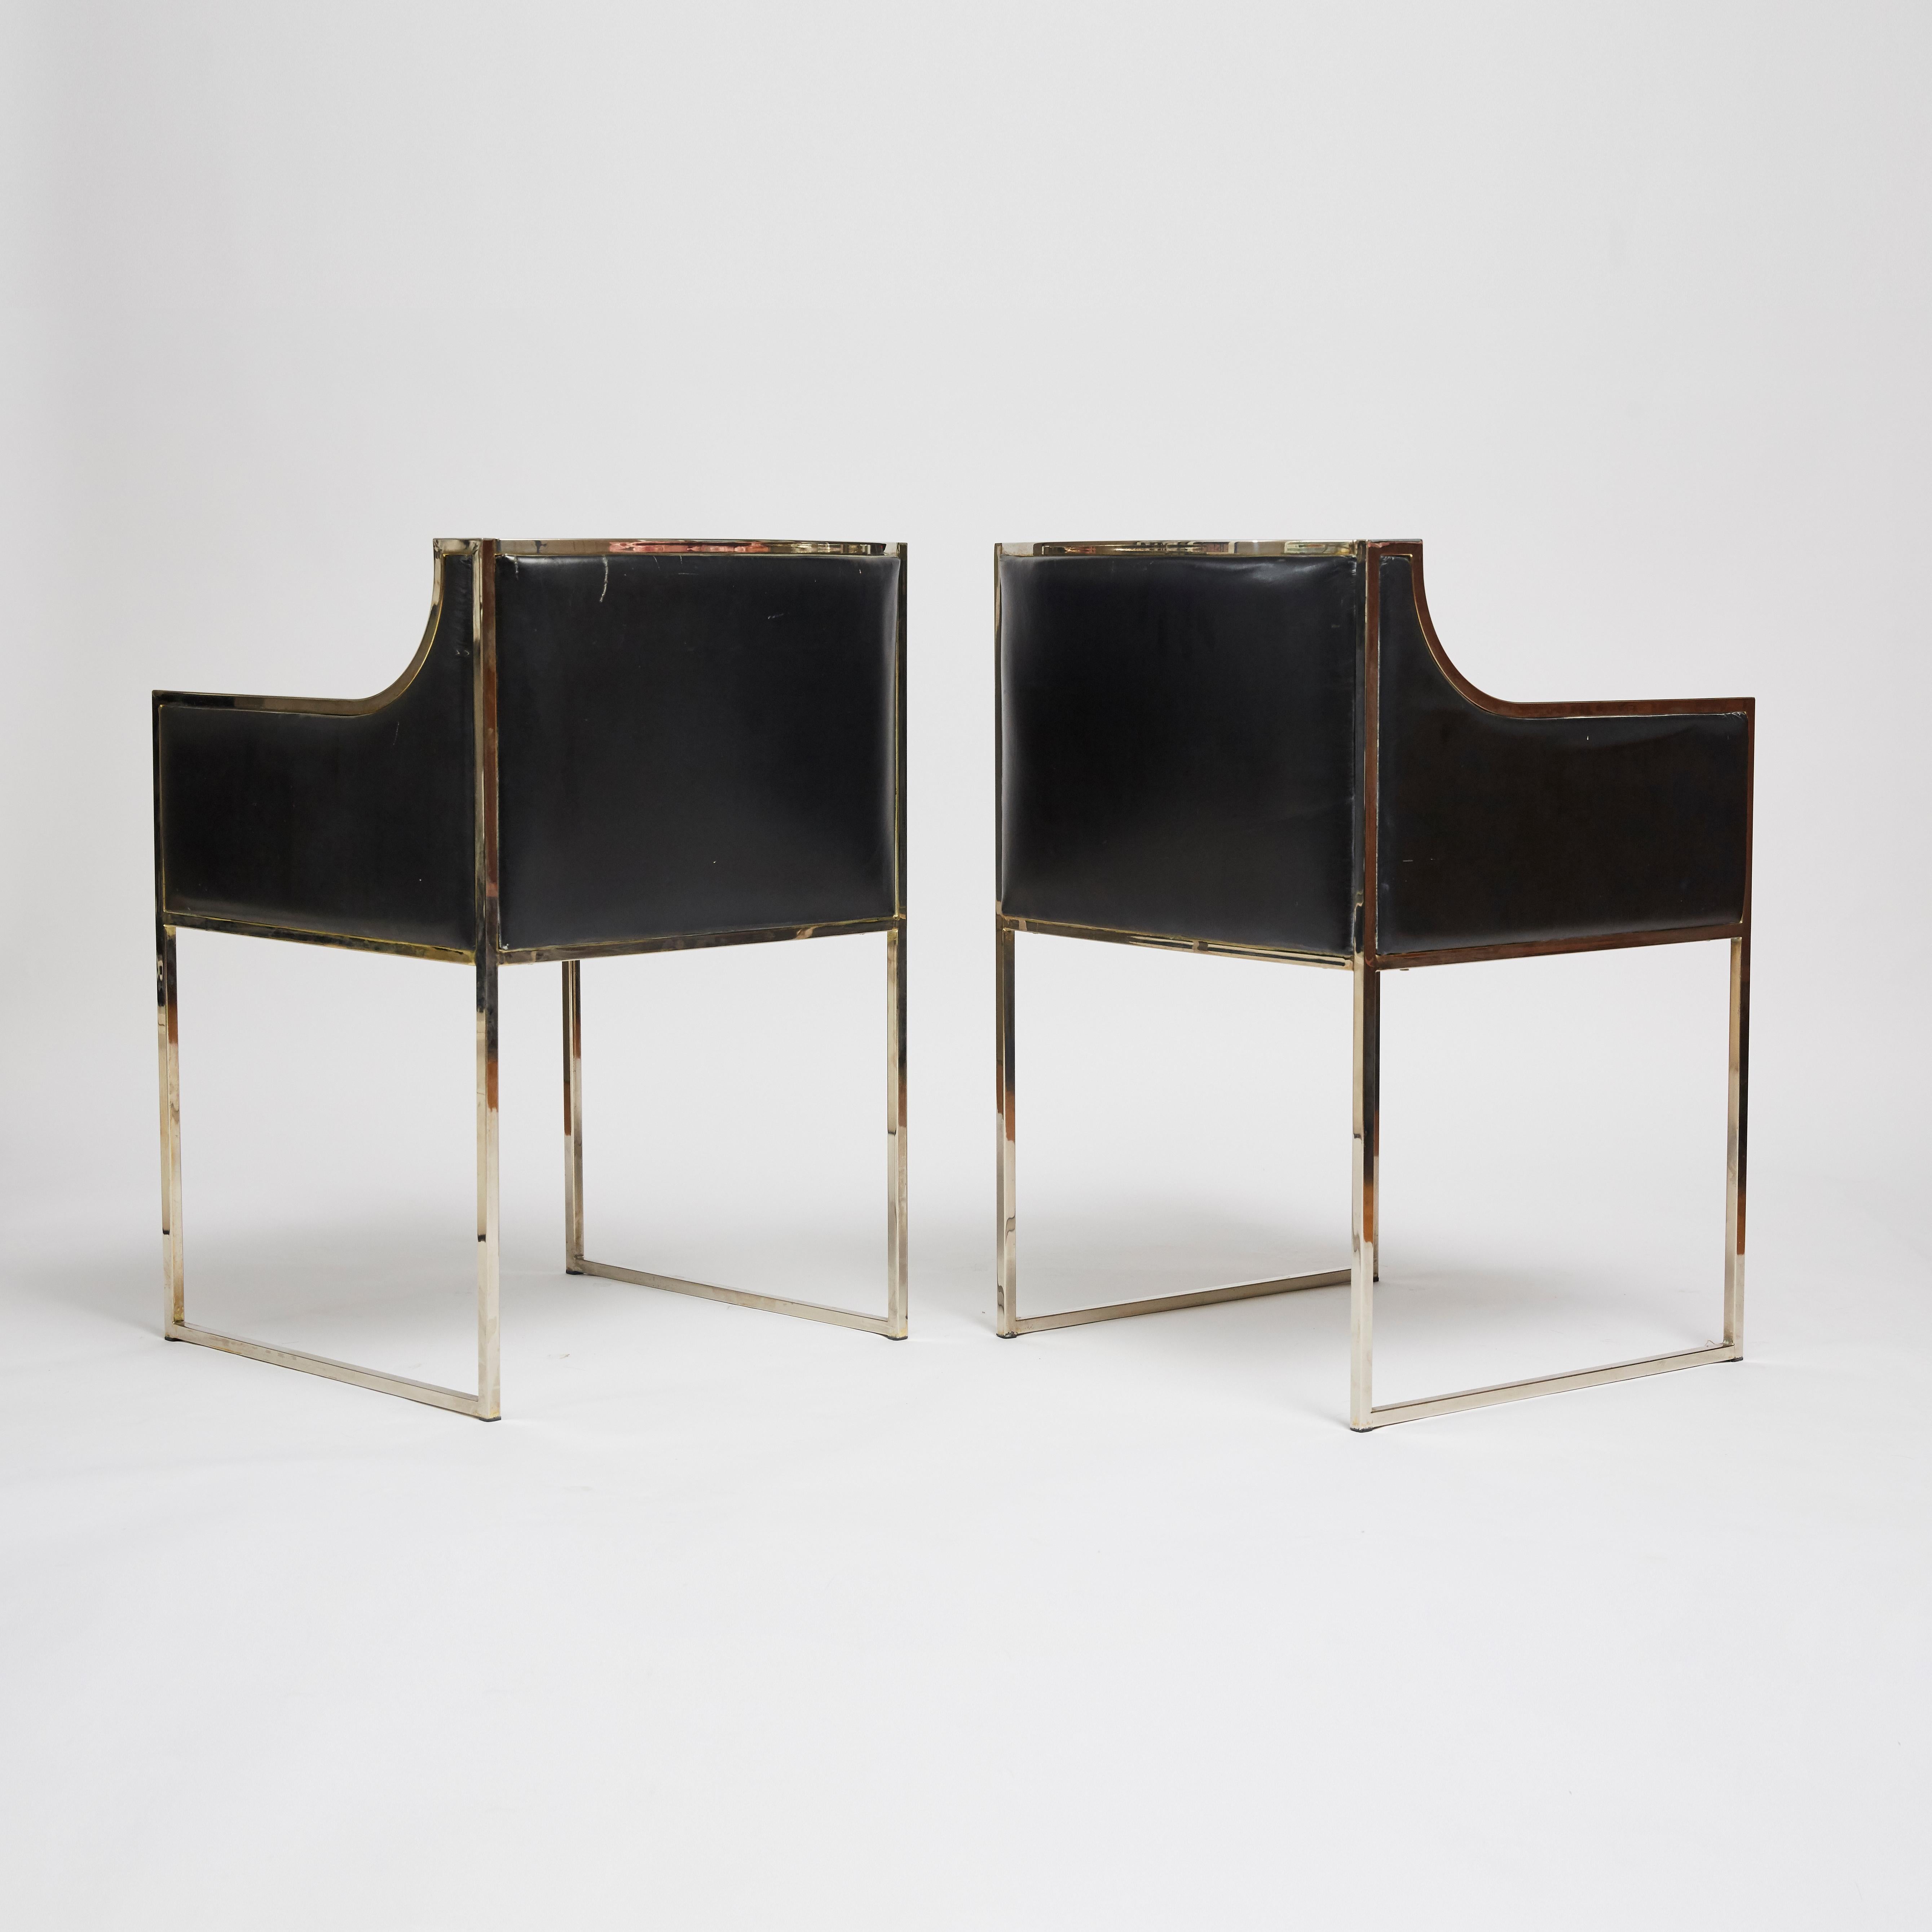 A pair of 1970s Italian armchairs with chrome frame and original black leather upholstery attributed to Willy Rizzo. Chrome frame shows some marks and leather upholstery shows marks and fading consistent with age and use.

Measures: W 54 cm x D 52